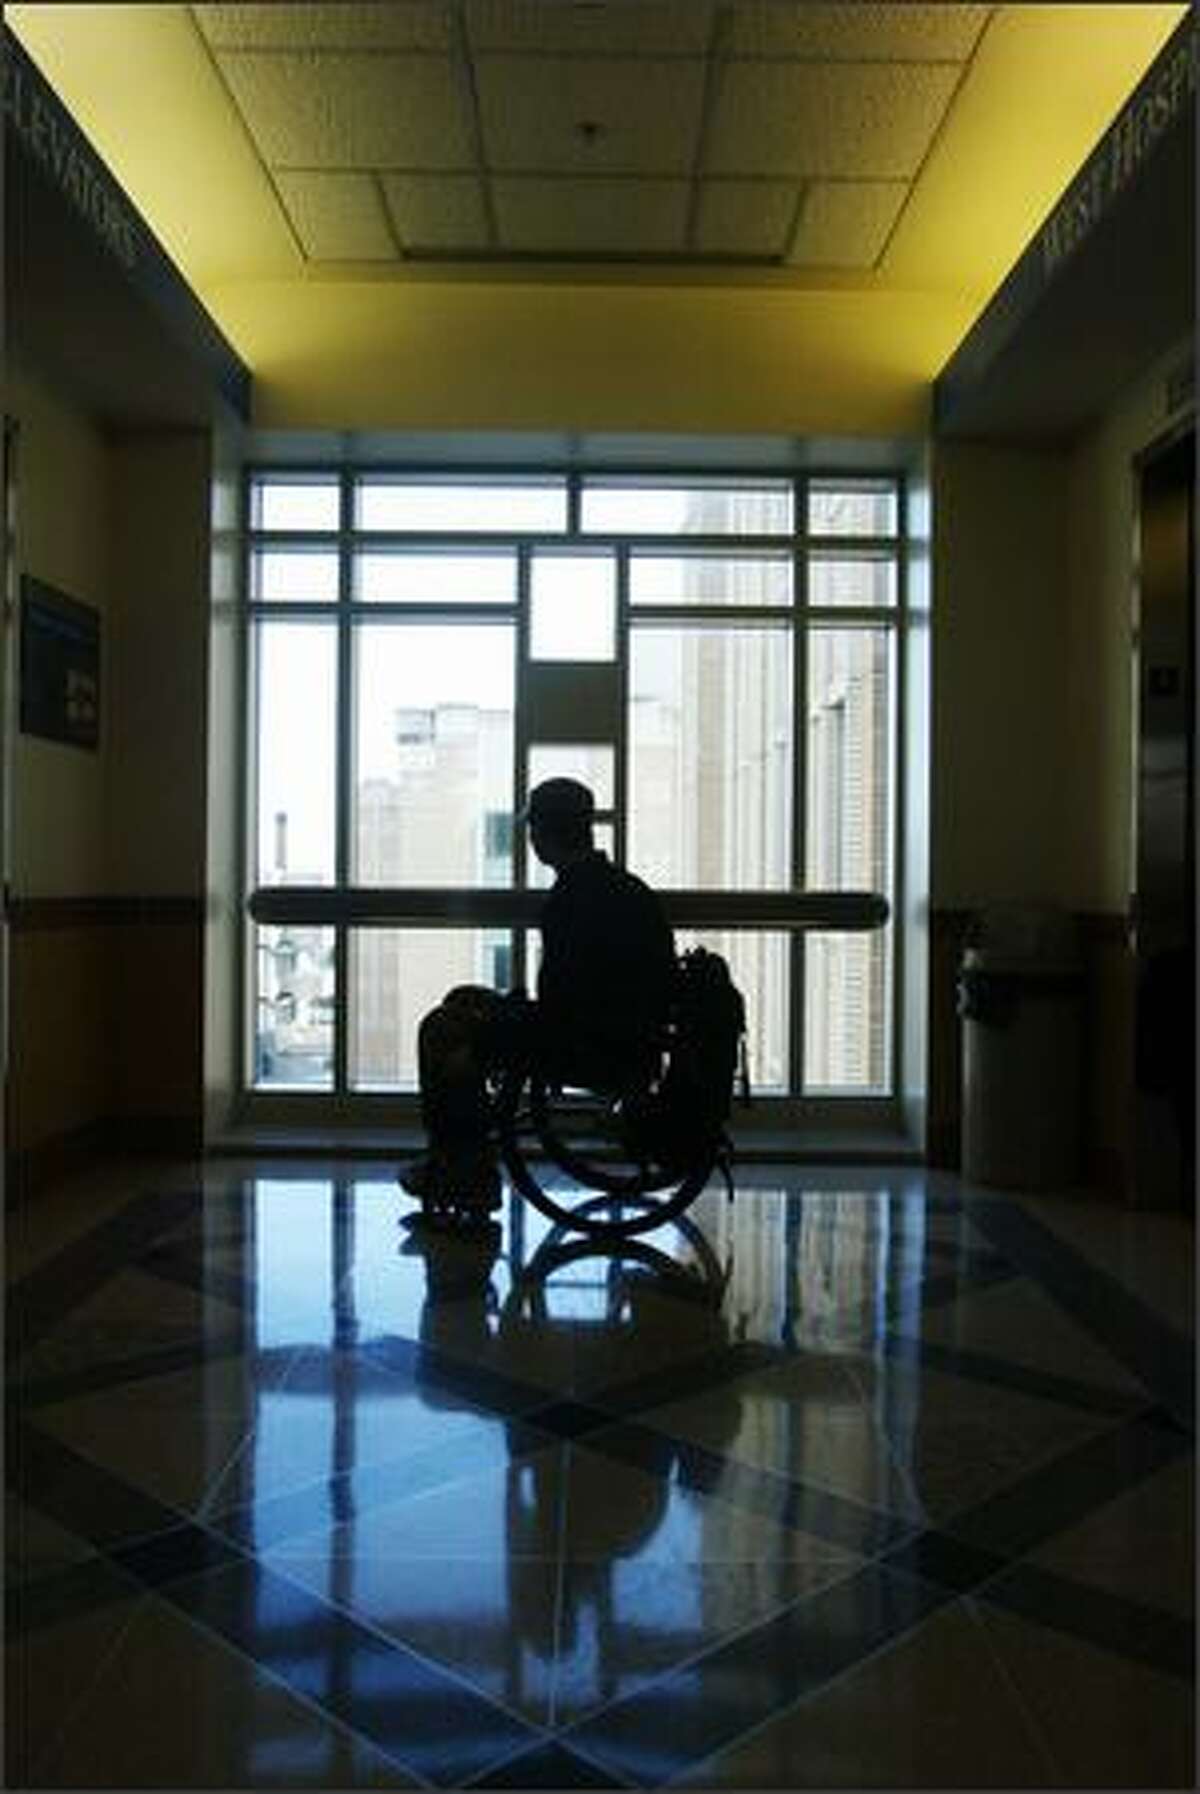 Brian Chaffin, 25, who broke his back three years ago and spent months at Harborview, pauses in a hallway. During his recovery, natural light and skyscapes were solace for Chaffin.